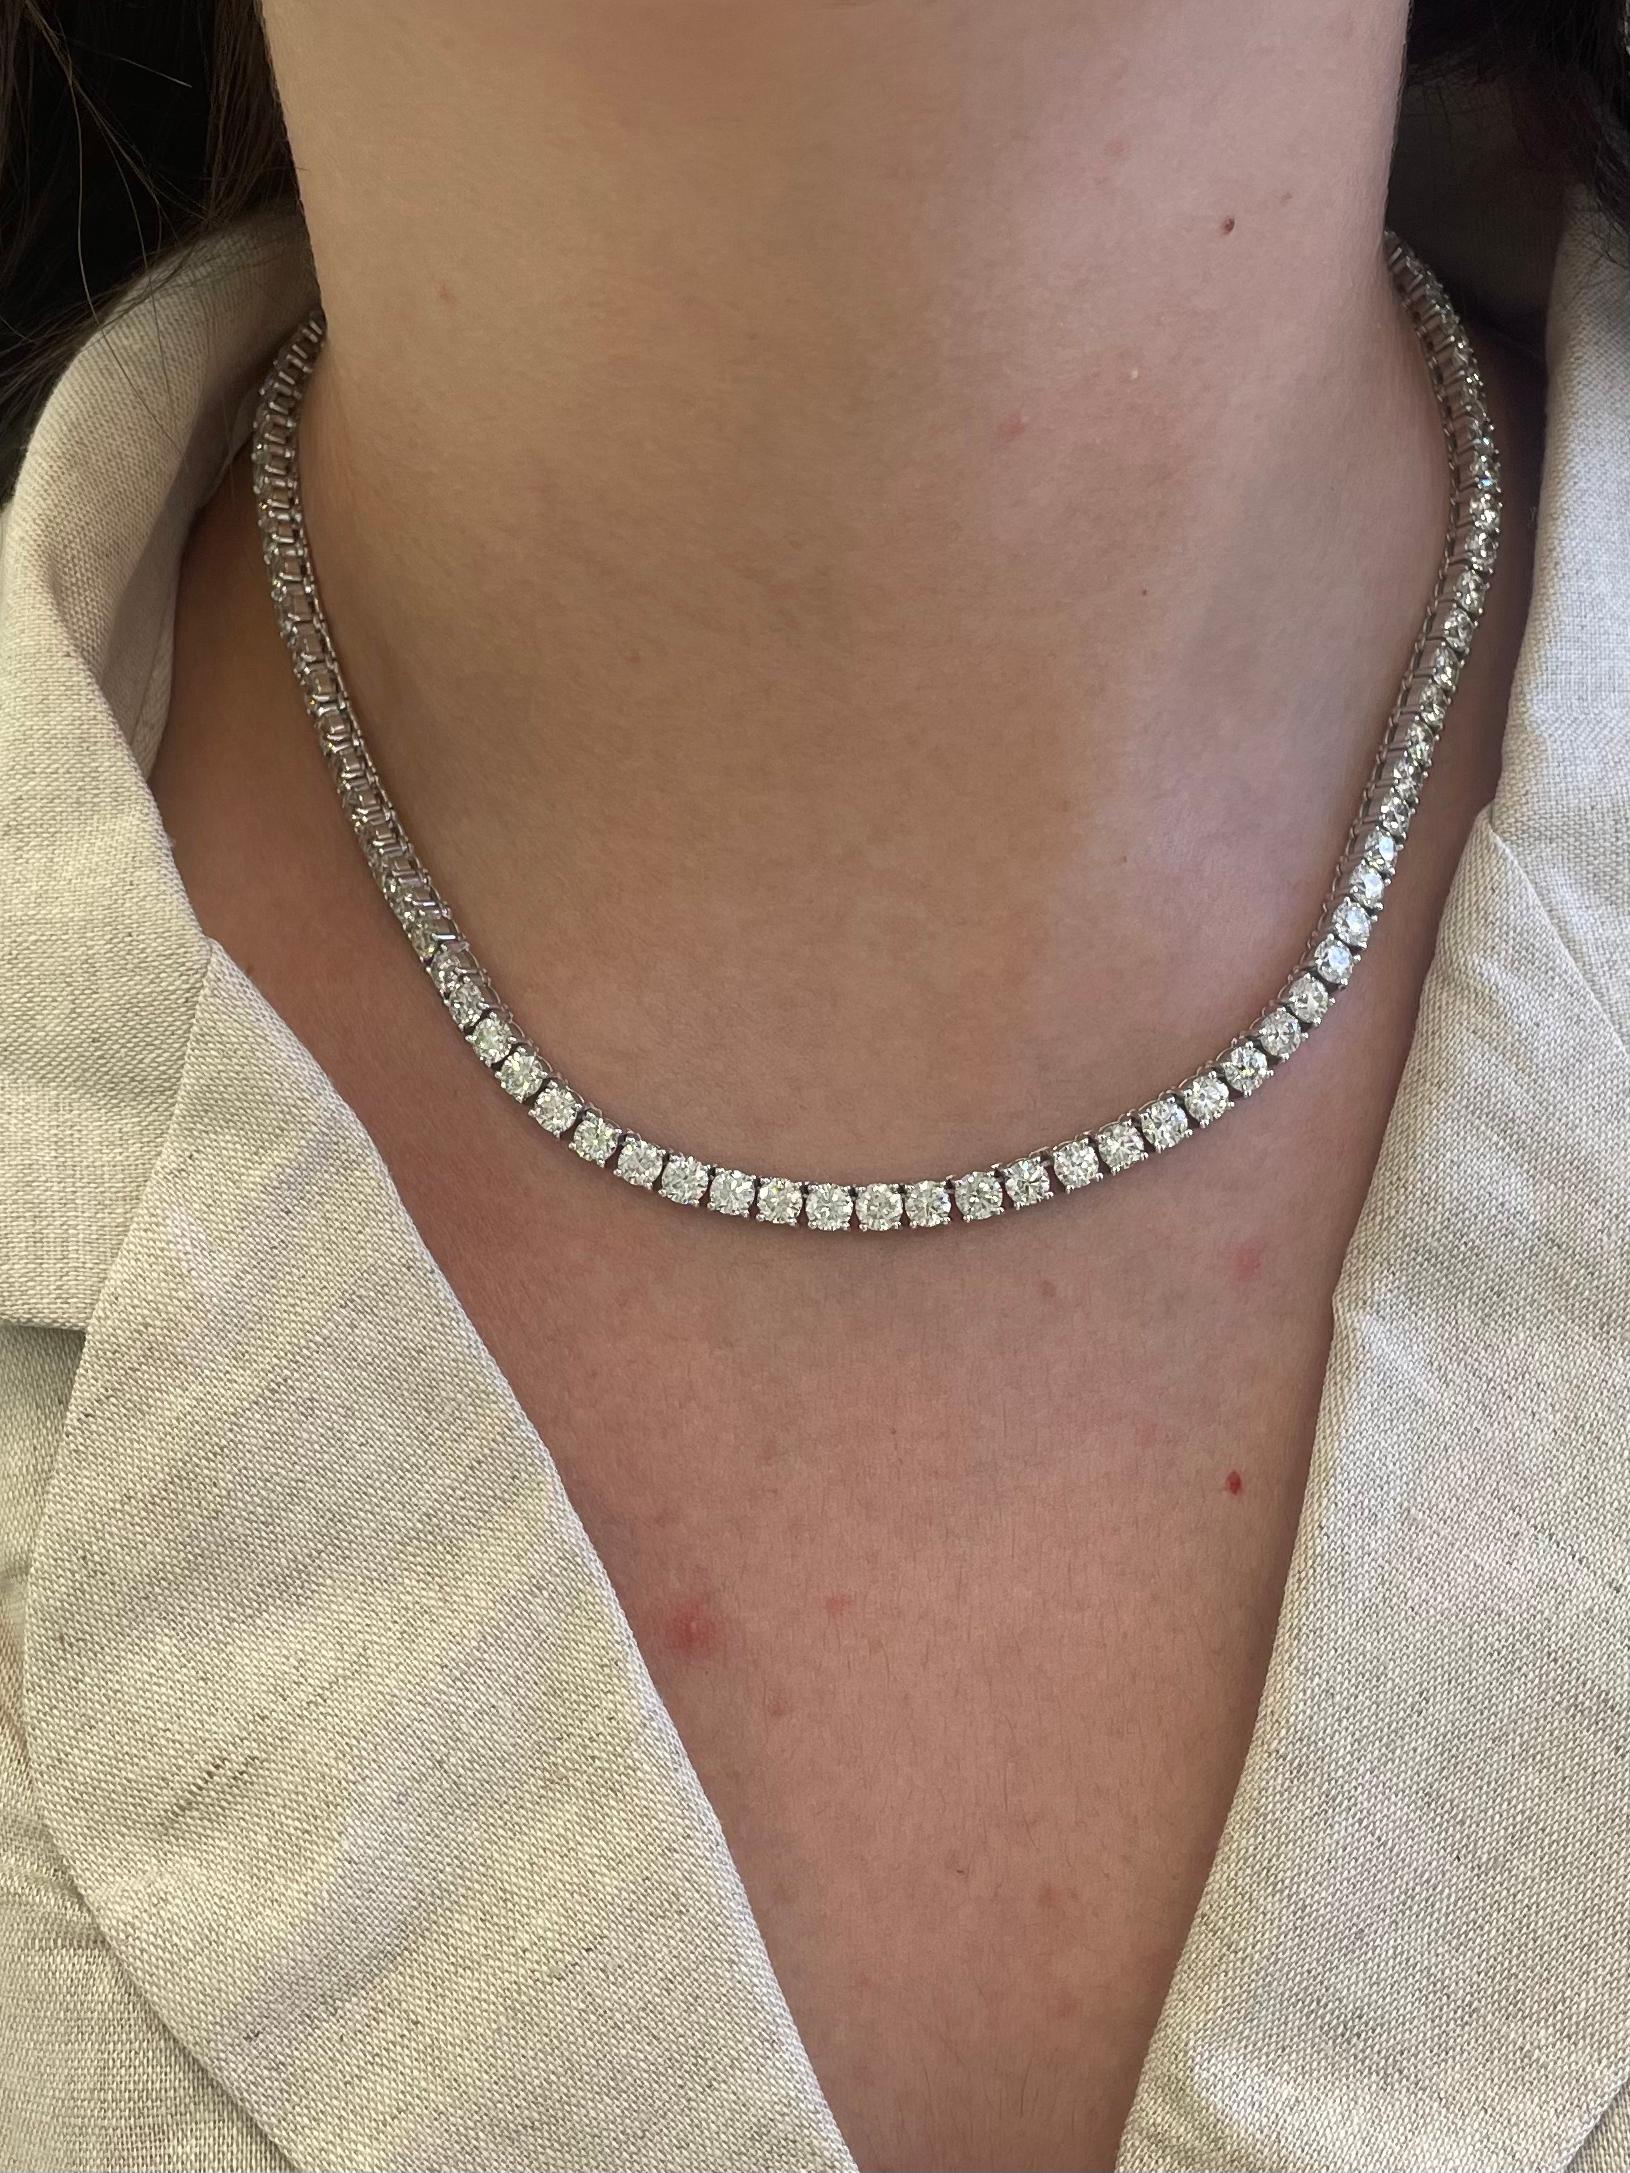 Beautiful and classic diamond tennis riviera necklace, by Alexander Beverly Hills.
91 round brilliant diamonds, 27.74. Approximately H-J color and VS2/SI1 clarity. 18k white gold, 45.59 grams, 16in.
Accommodated with an up-to-date digital appraisal